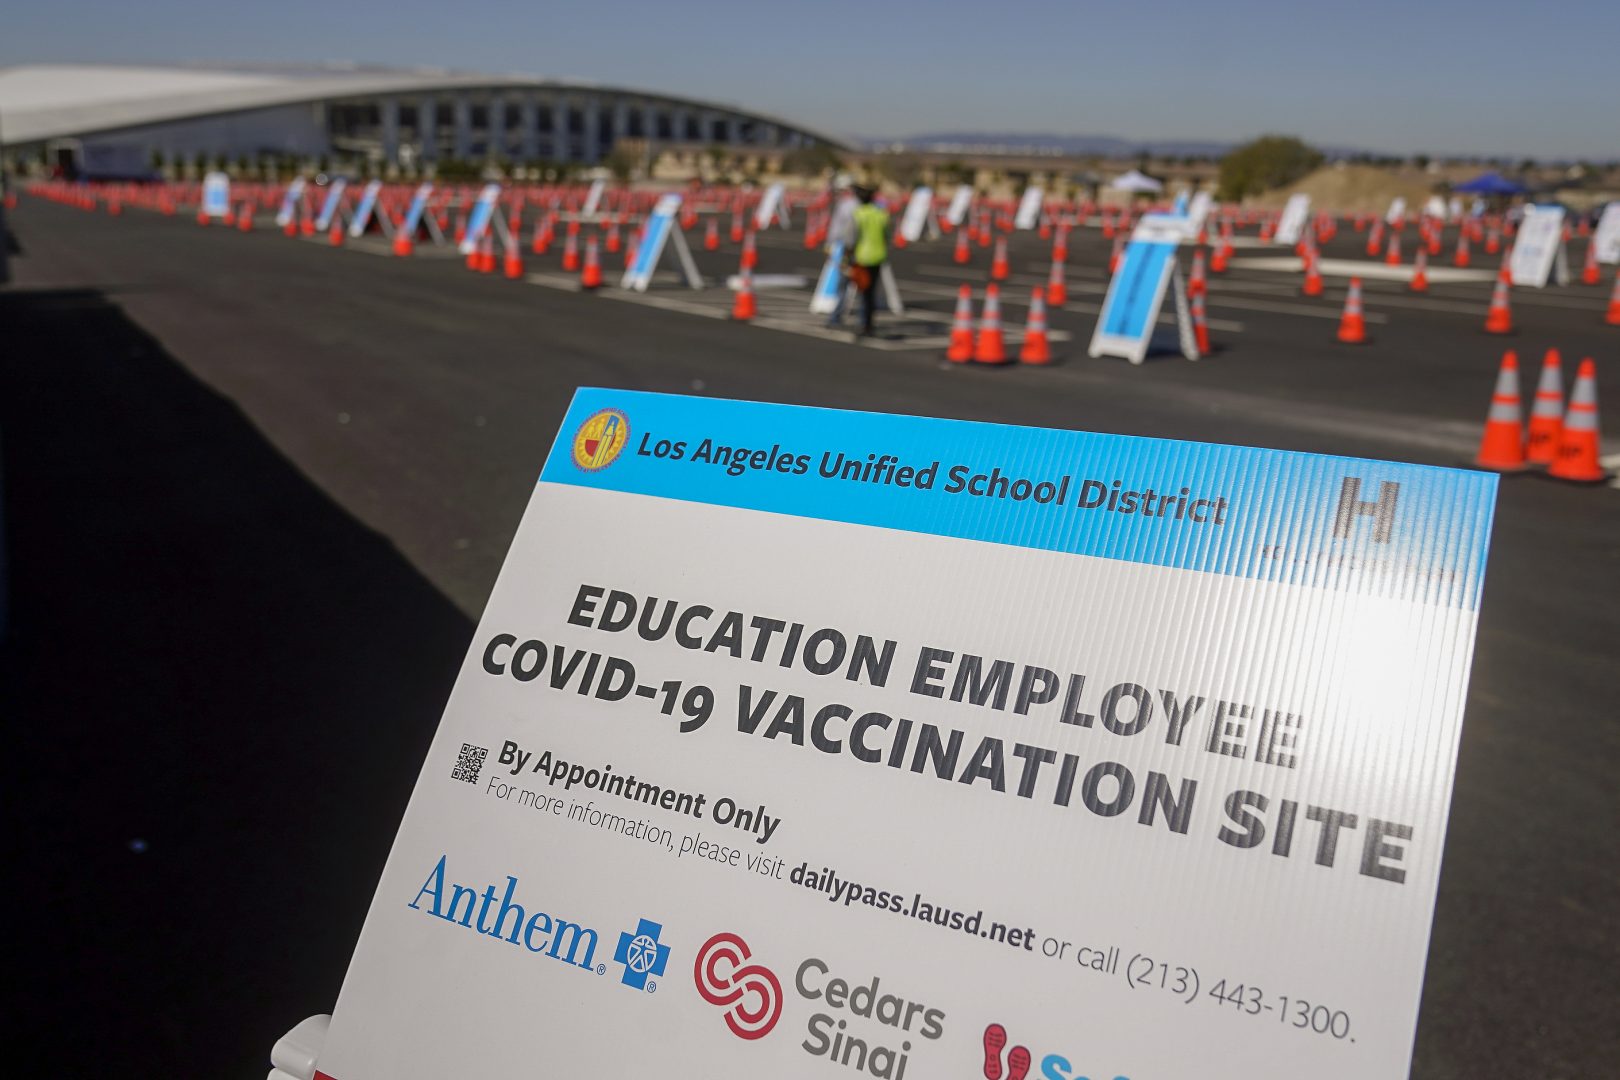 FILE PHOTO: In this March 2, 2021, file photo, a sign is displayed at a COVID-19 vaccination site for employees of the Los Angeles school district in the parking lot of SOFI Stadium in Inglewood, Calif. California will become the first state in the nation to require all teachers and school staff to get vaccinated or undergo weekly COVID-19 testing.